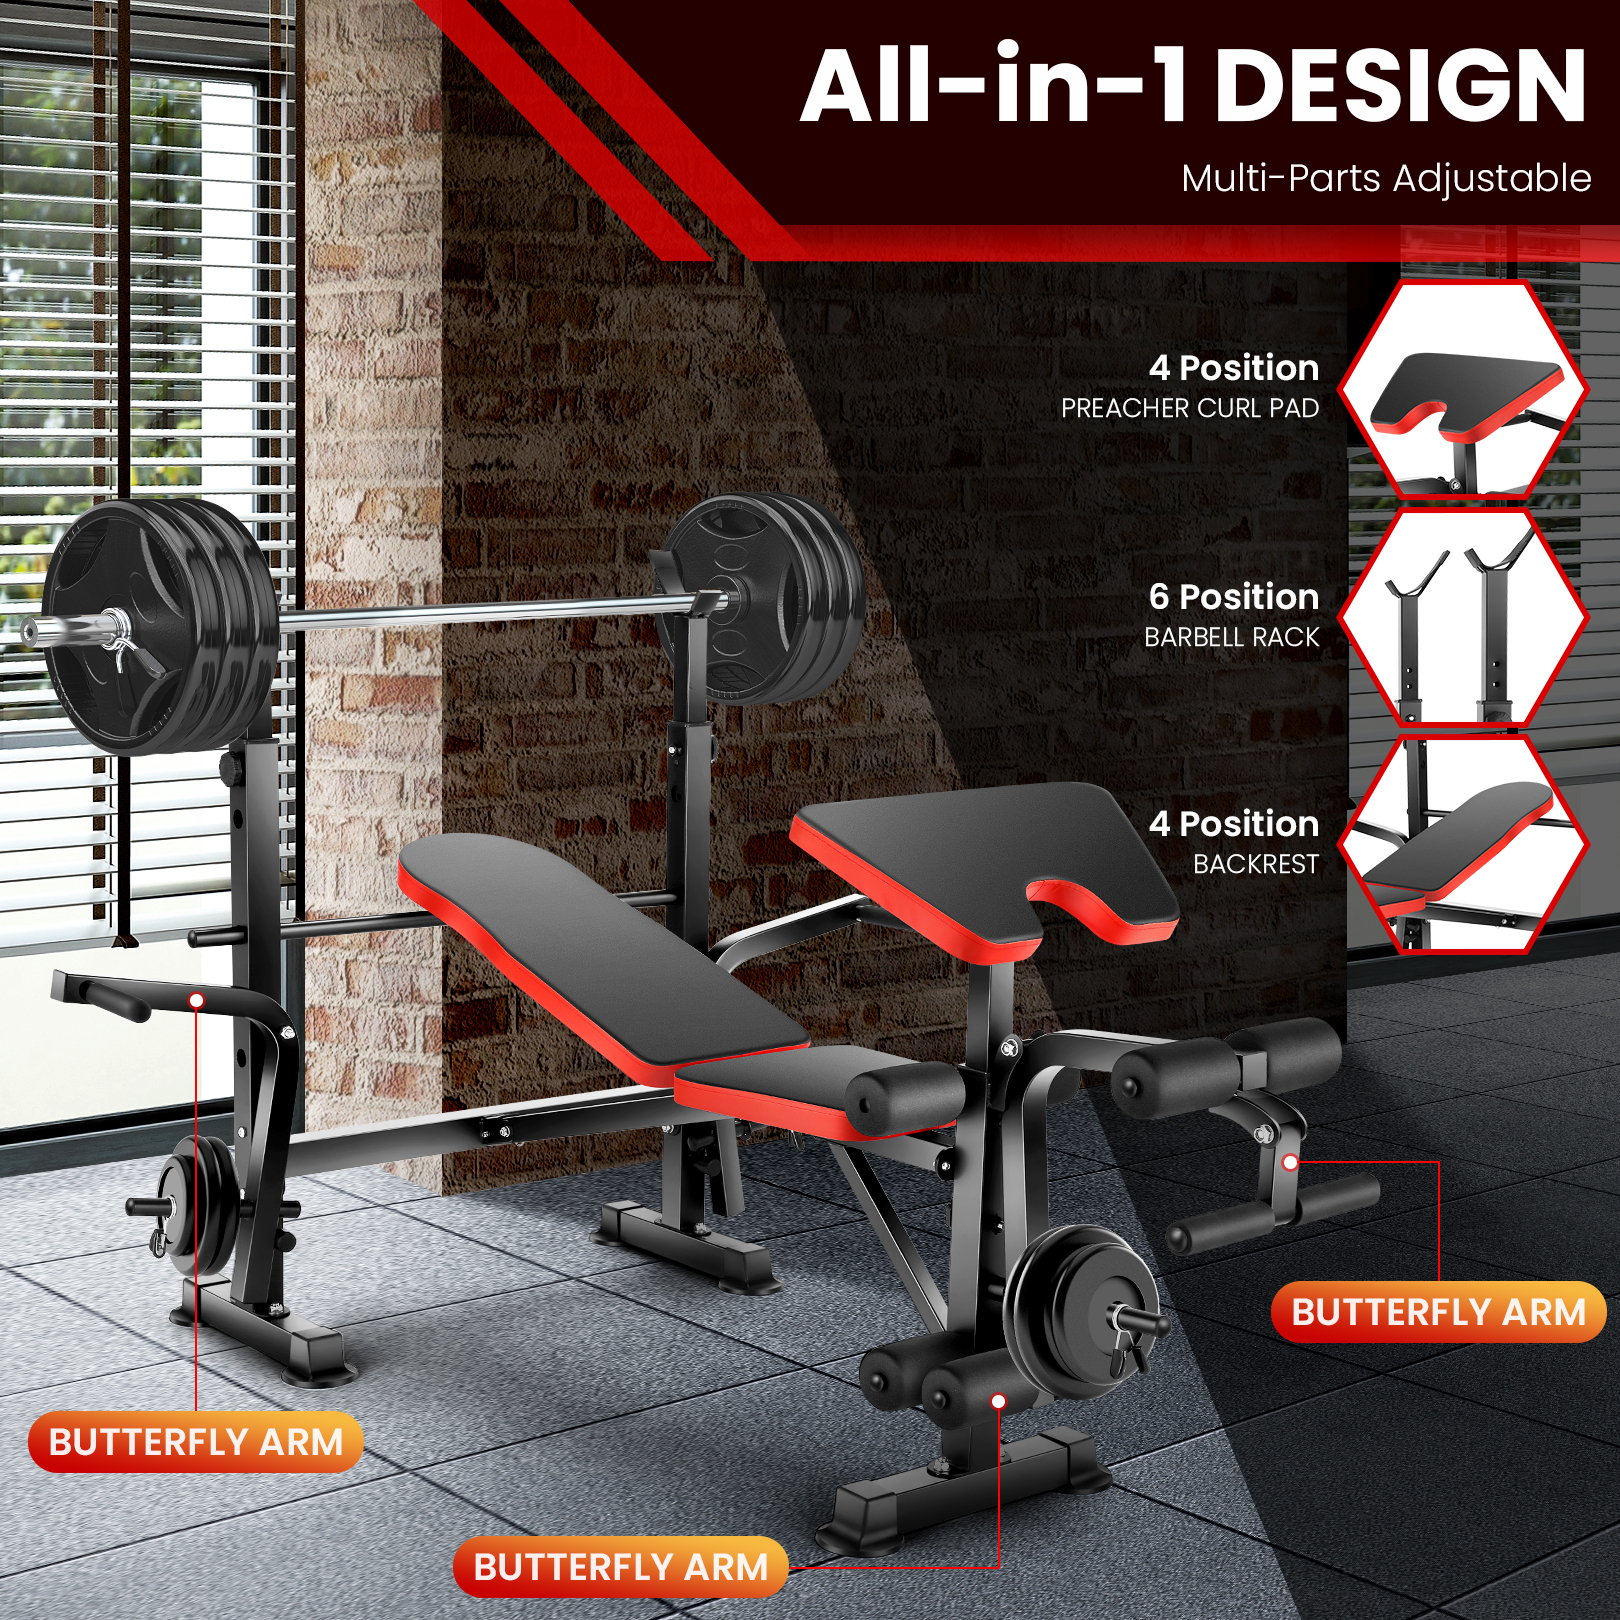 VIBESPARK Adjustable Weight Bench 600lbs 5-in-1 Foldable Workout Bench Set with Barbell Rack Leg Developer Preacher Curl Rack Dumbbell Fly Attachment, Multi-Function Strength Training Bench Press - image 2 of 10